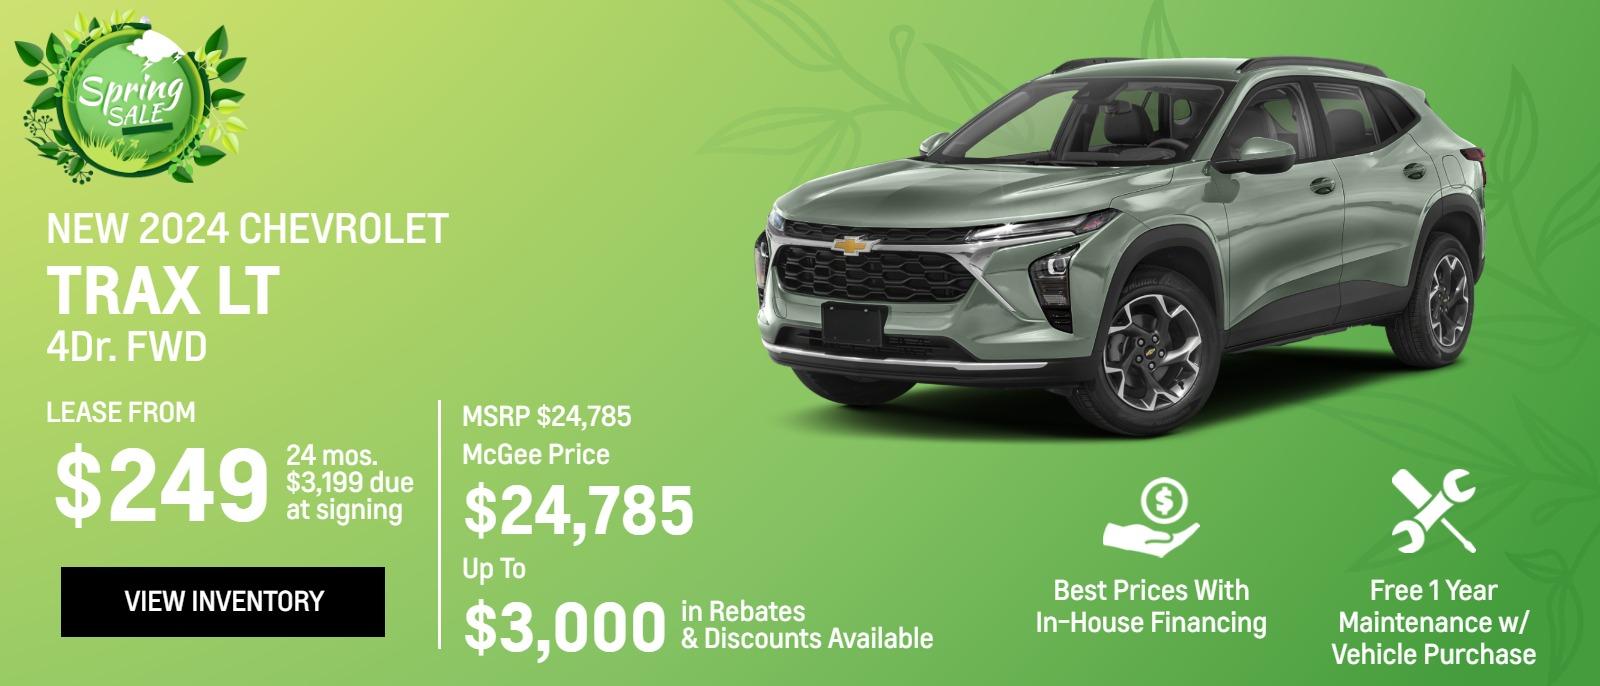 New 2024 Chevrolet
Trax LT 4Dr. FWD 

Lease From
$249
24 mos.
$3,199 due
at signing

MSRP $24,785
McGee Price
$24,785 (bold larger text)

Up To
$3,000 (bold larger text)
in Rebates
&Discounts Available

Best Prices With In-House Financing

Free 1 Year Maintenance
w/ Vehicle Purchase